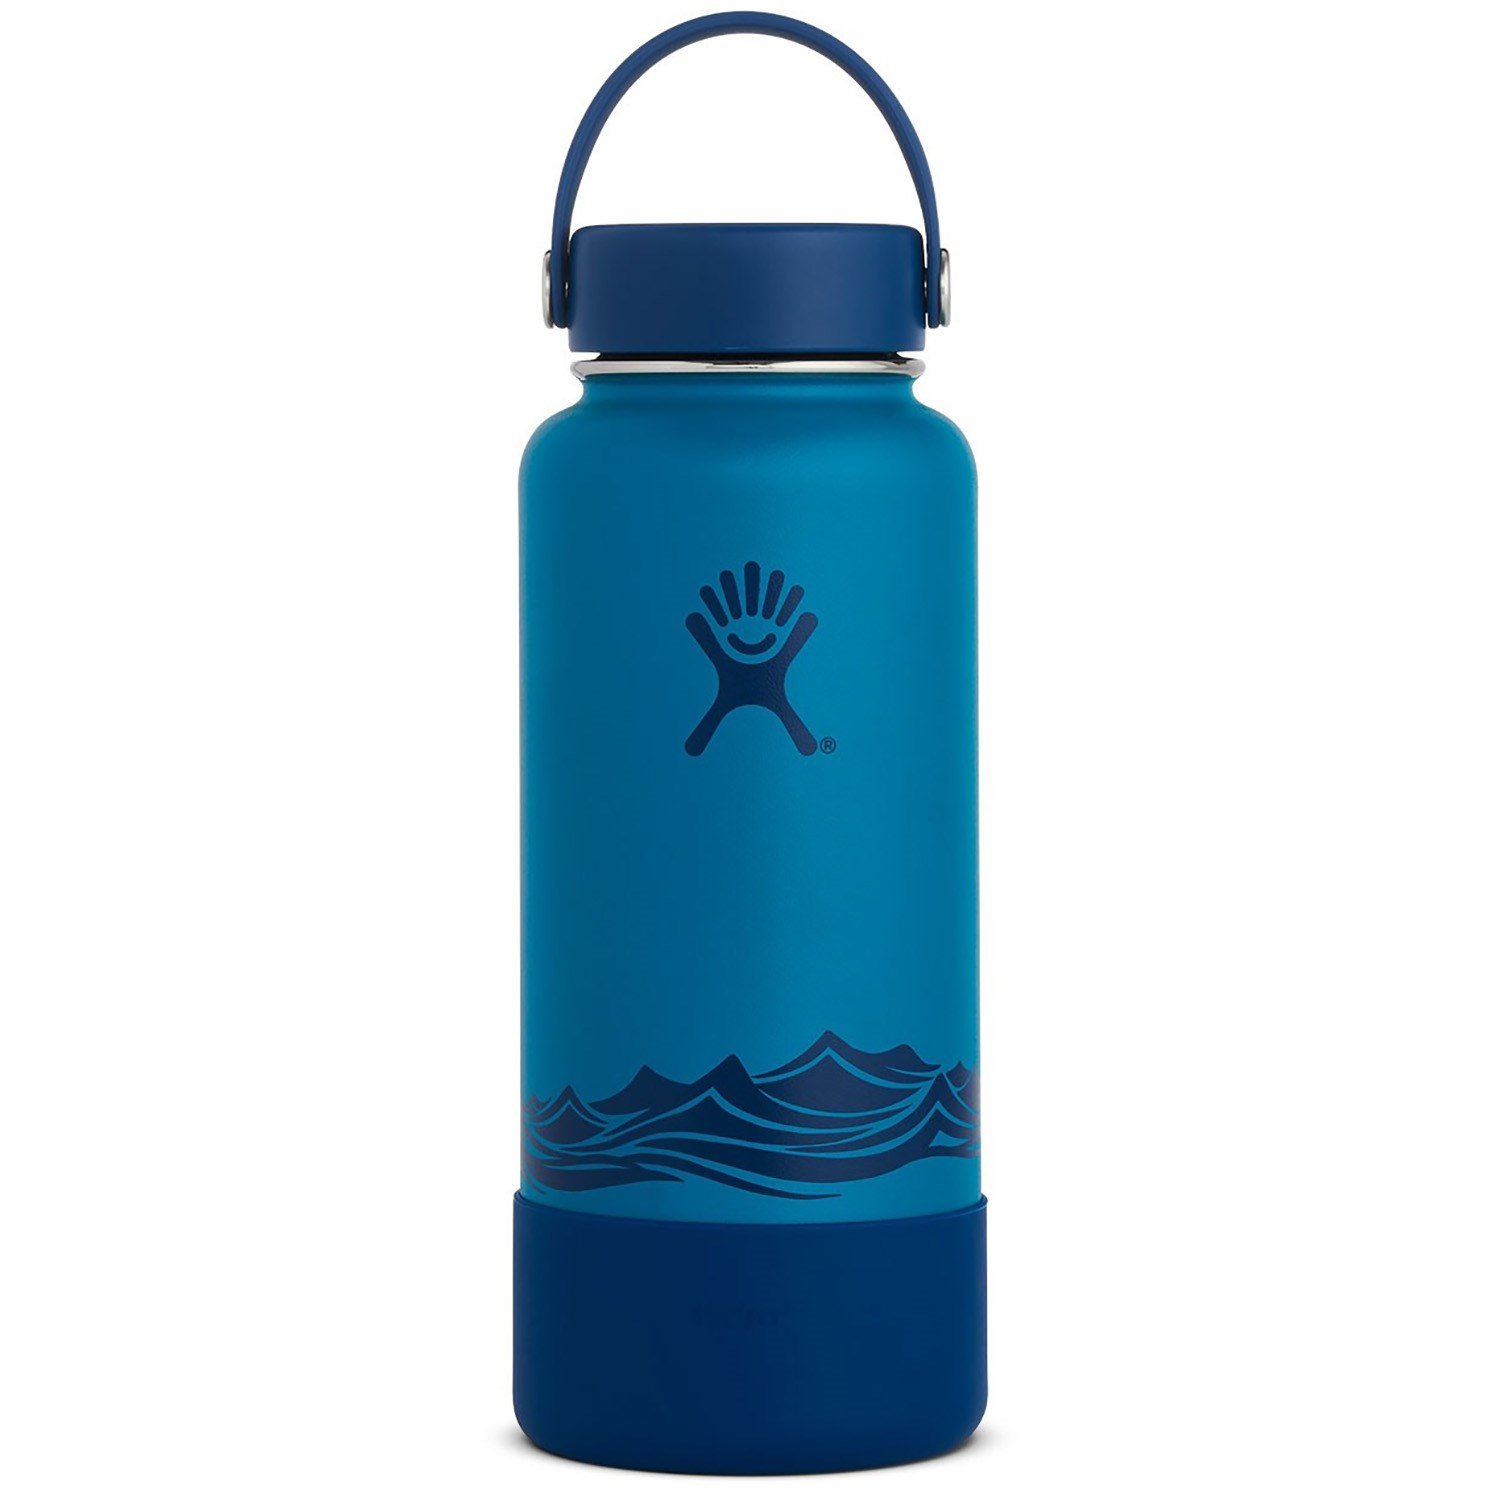 Special Edition Hydro Flask Online, 50% OFF | www.propellermadrid.com